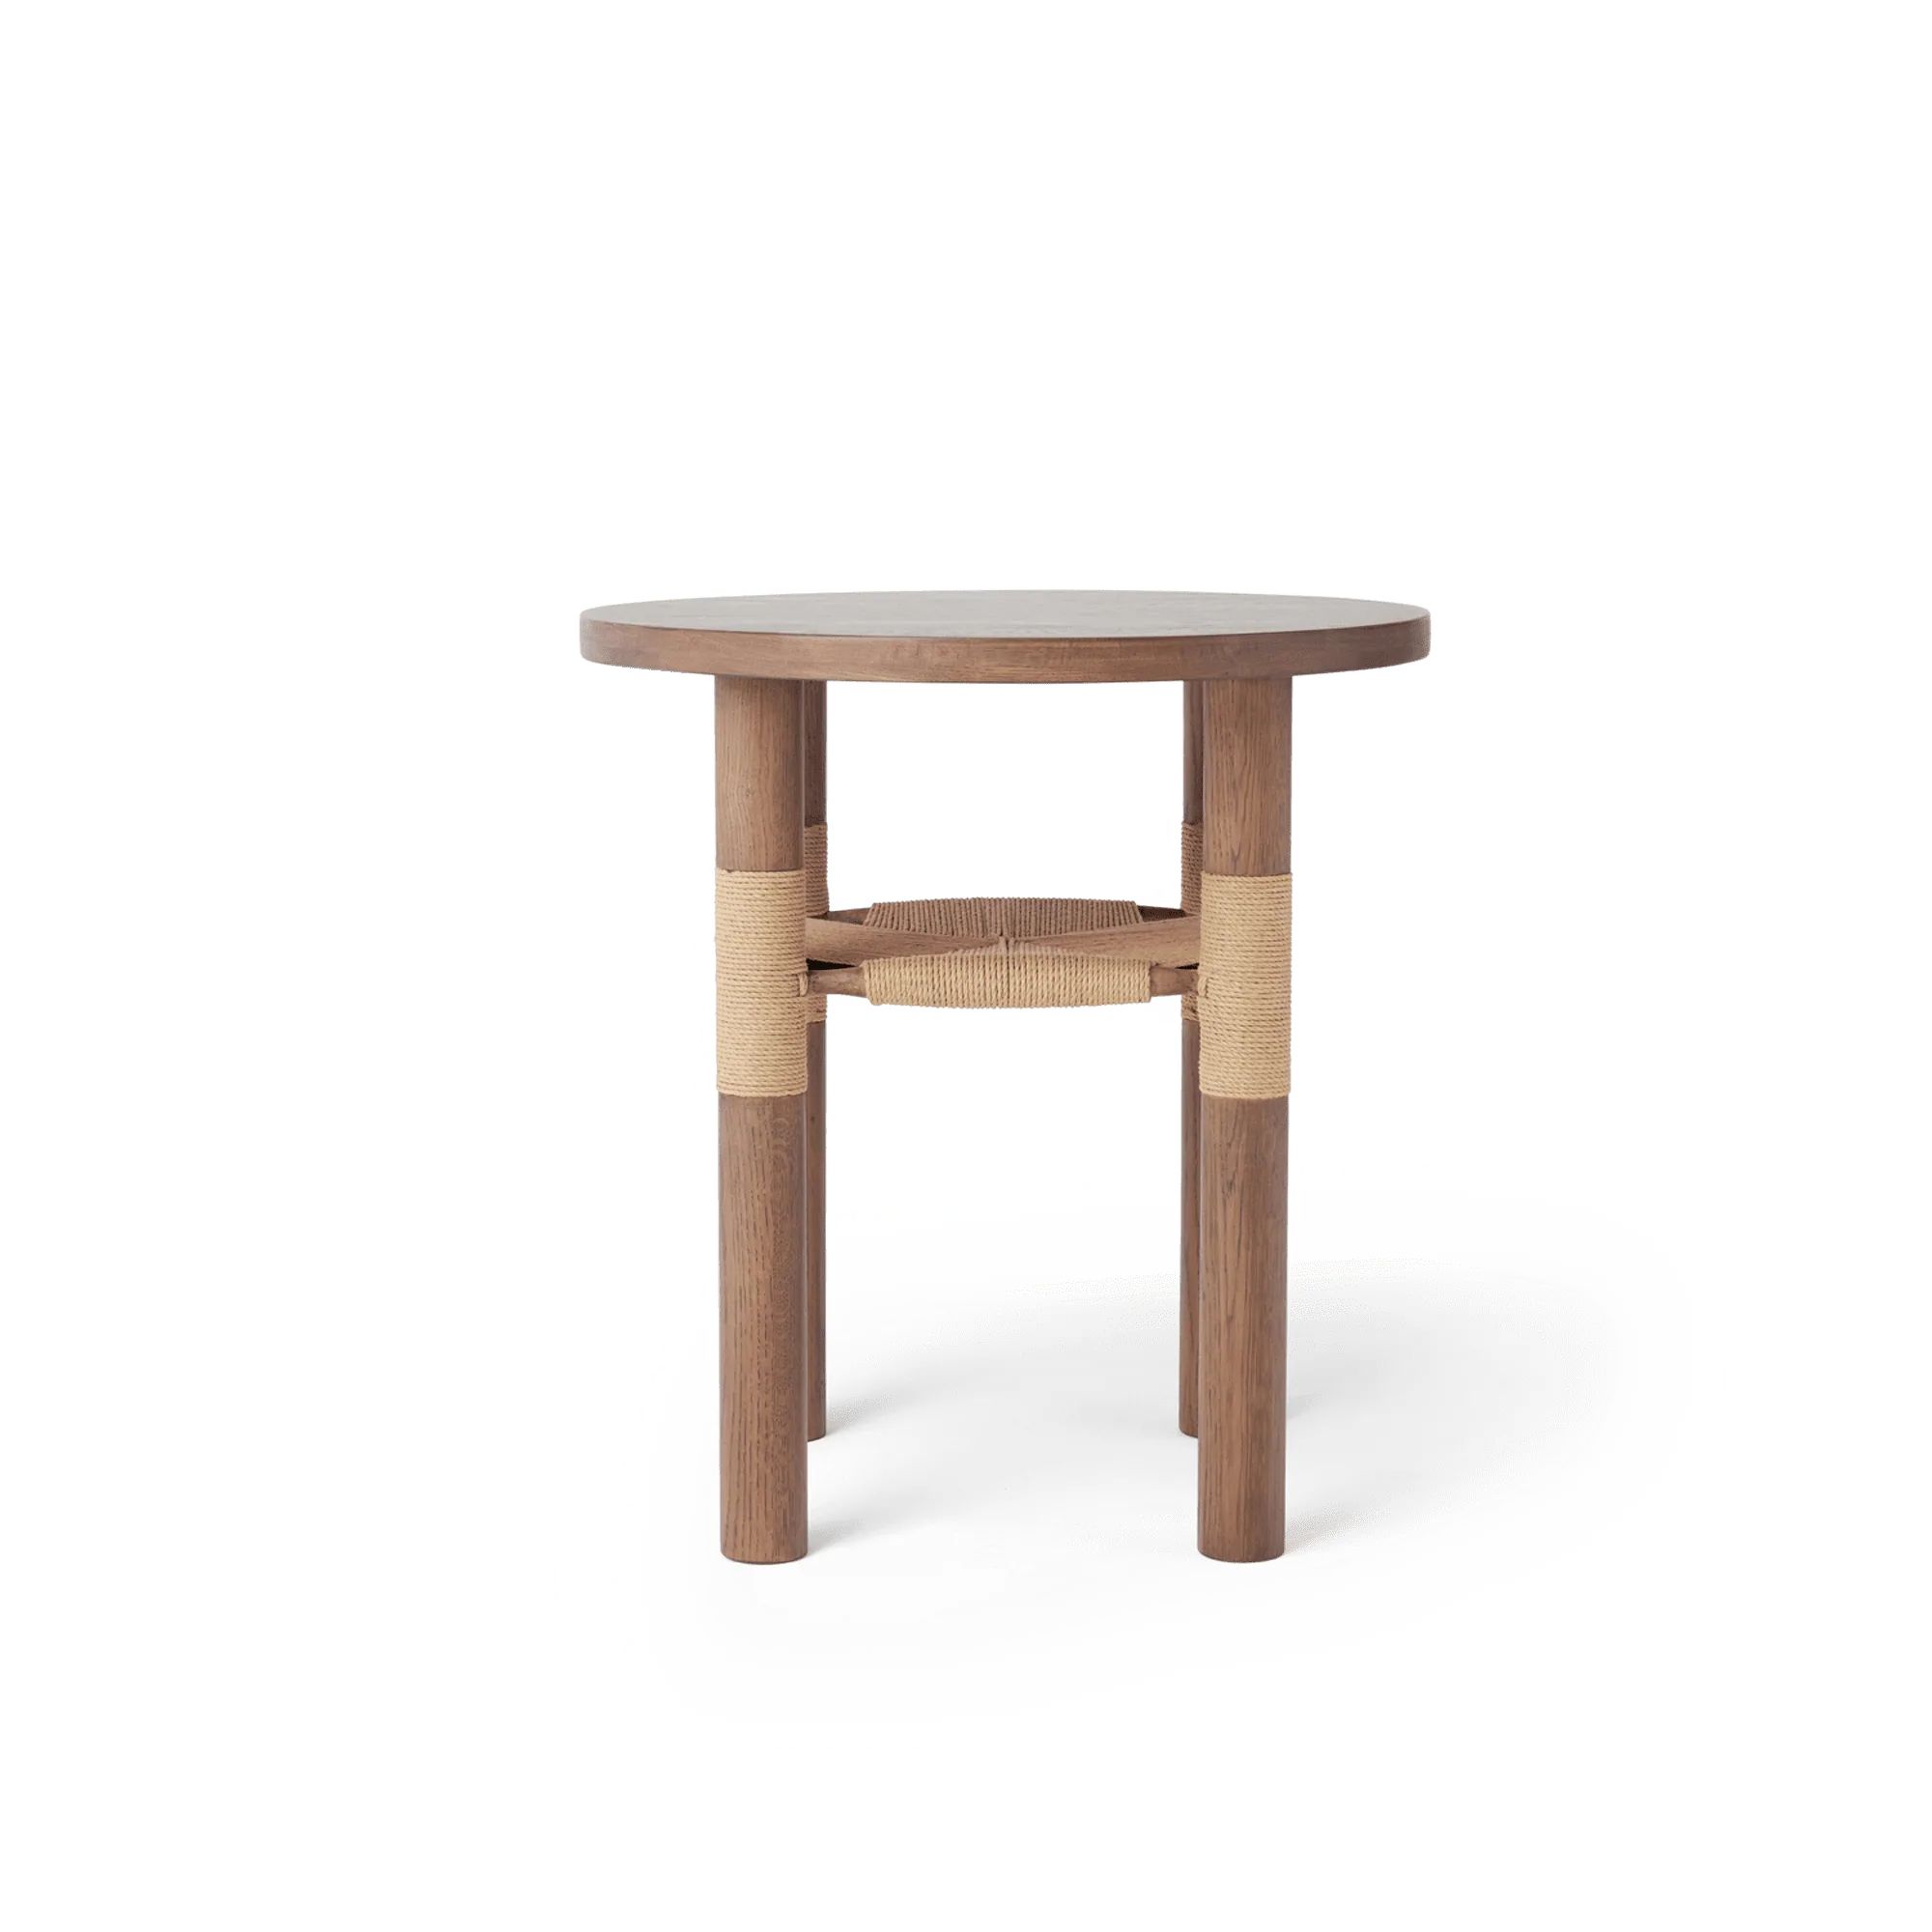 Table #3 - Side Table in White Oak and Paper Cord | Hati Home